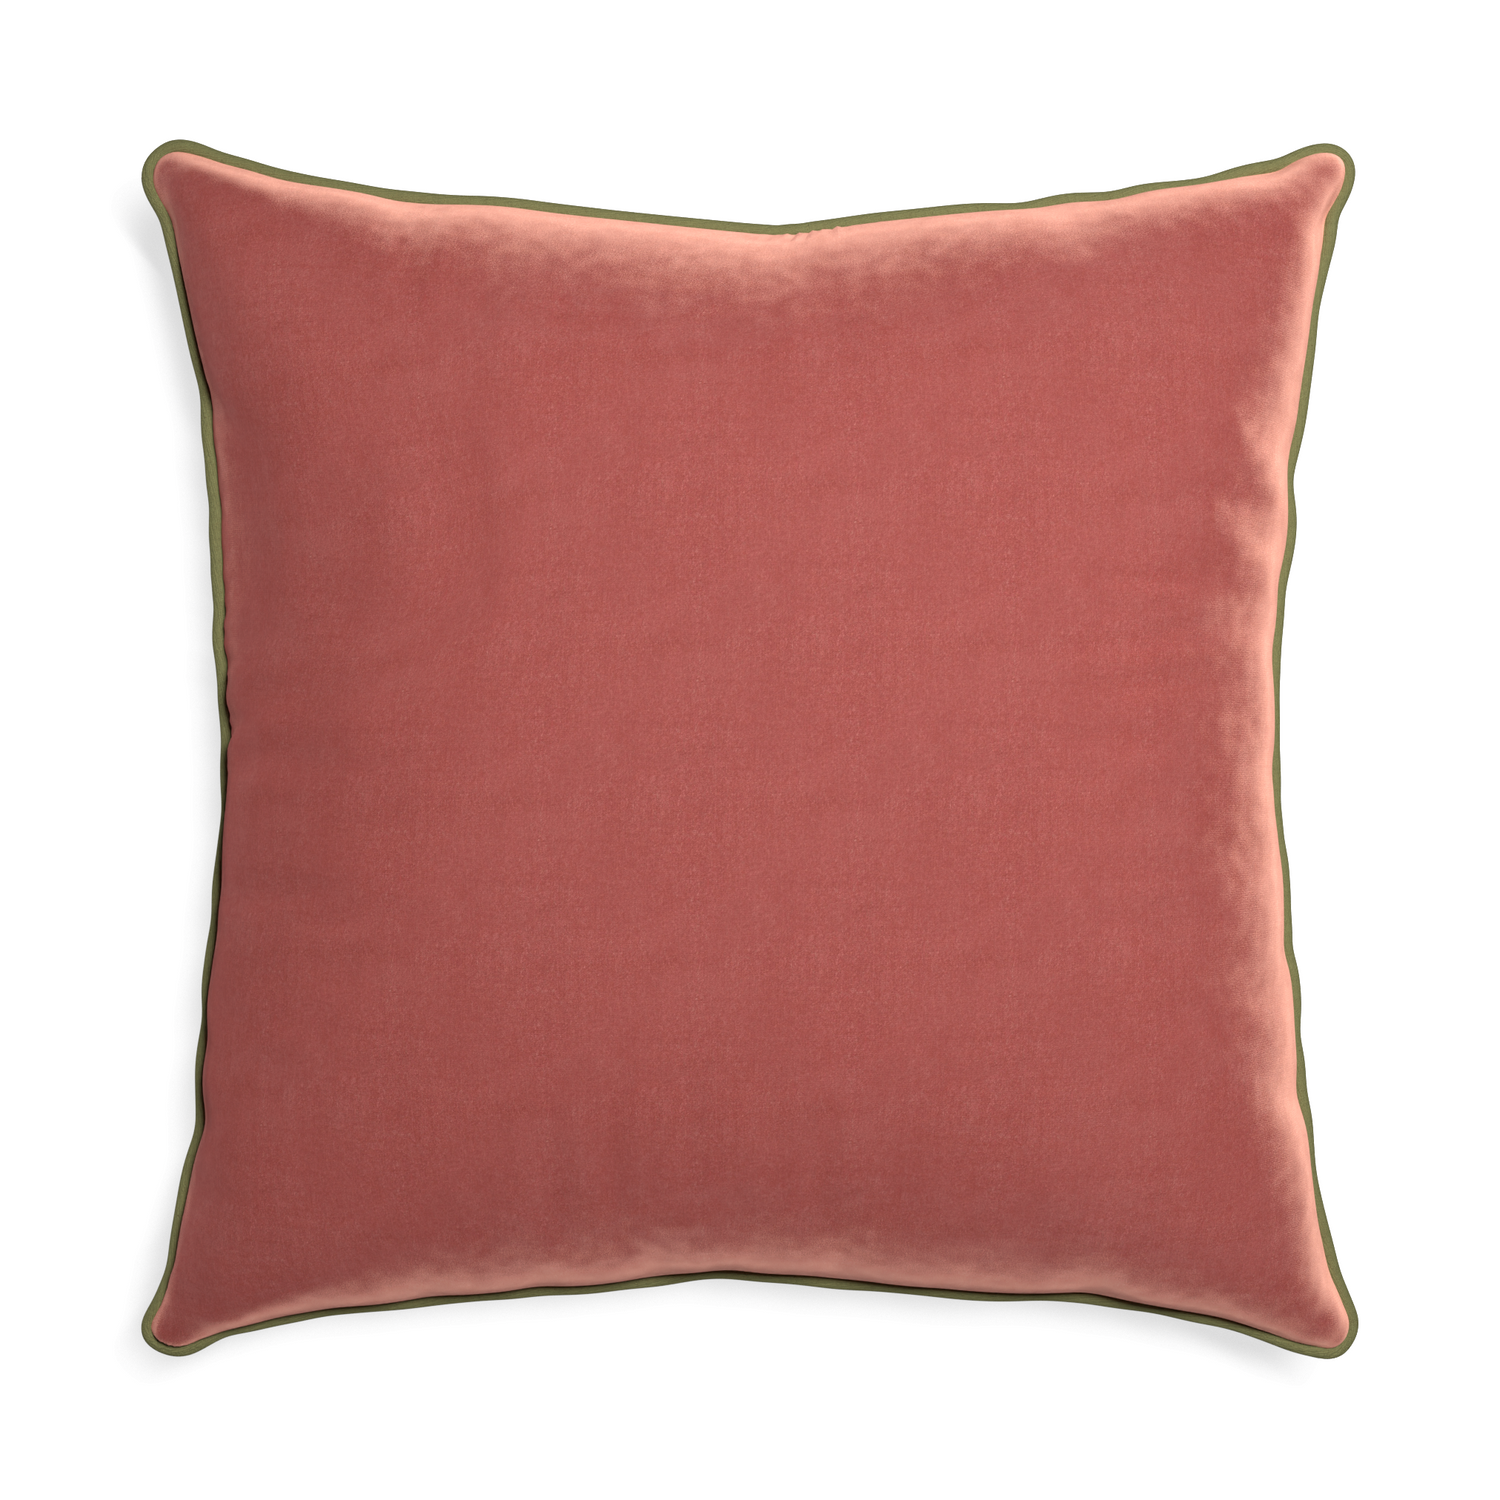 Euro-sham cosmo velvet custom coralpillow with moss piping on white background